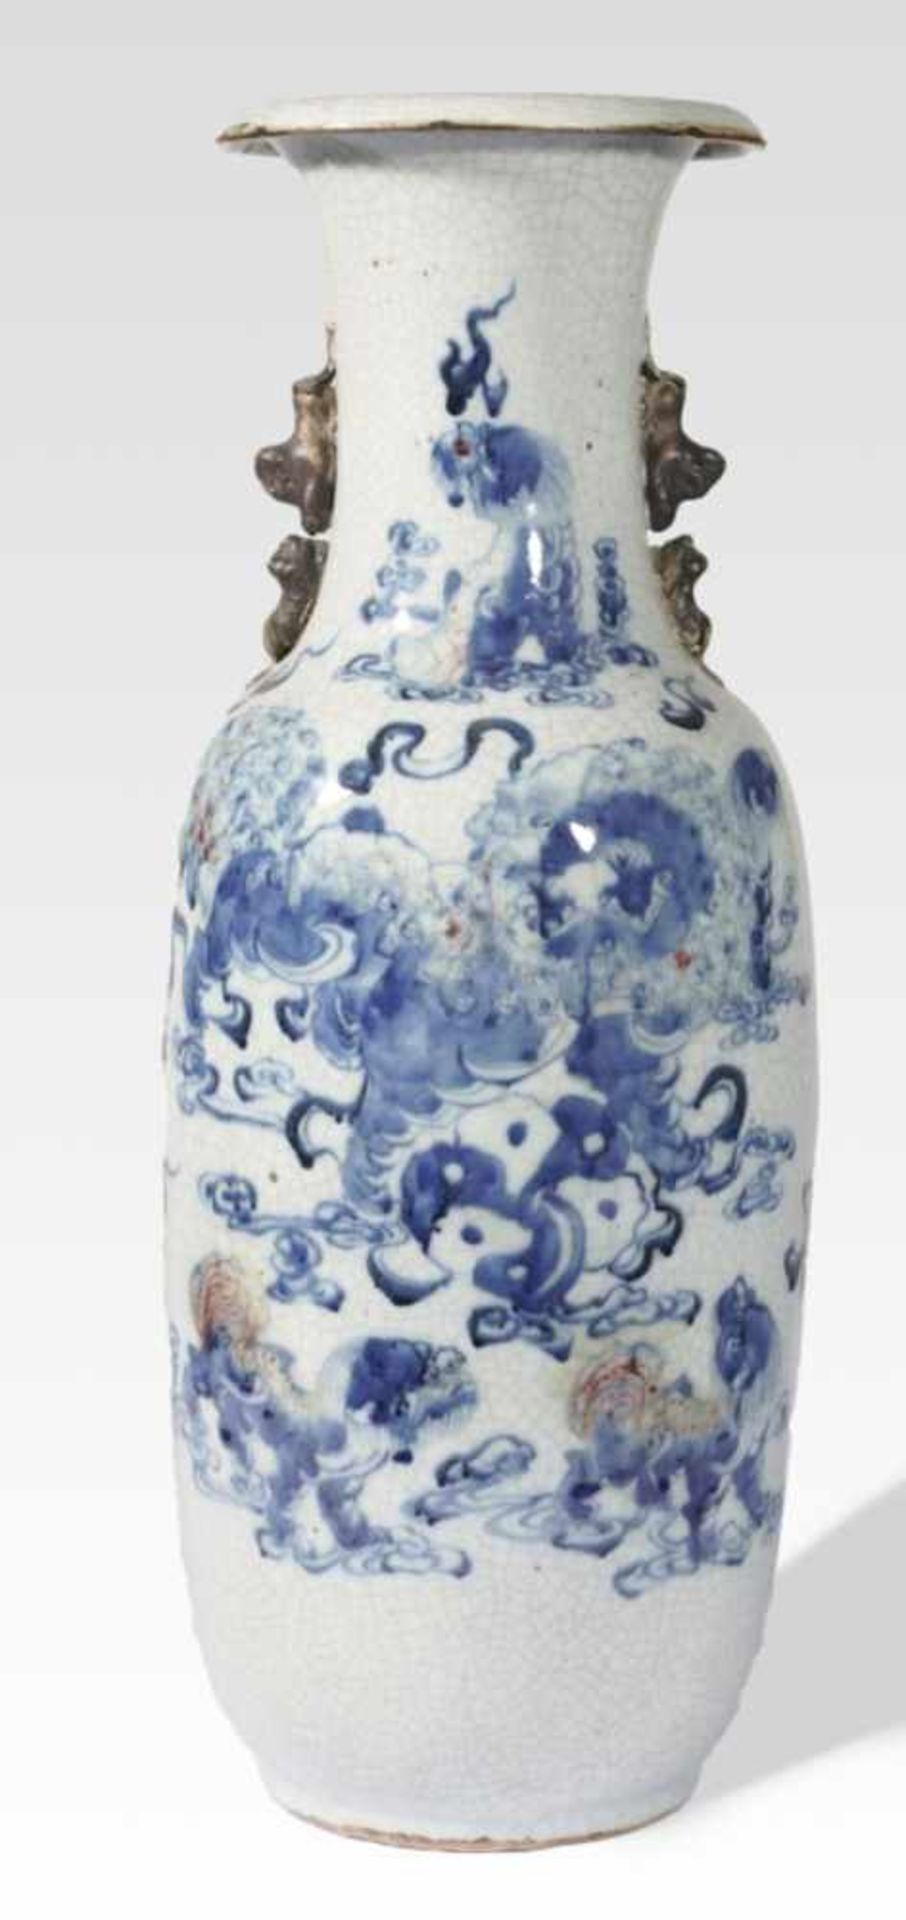 Very large vase with blue decor, China or Japan, 20th c., 61 cm high, Provenance: Private